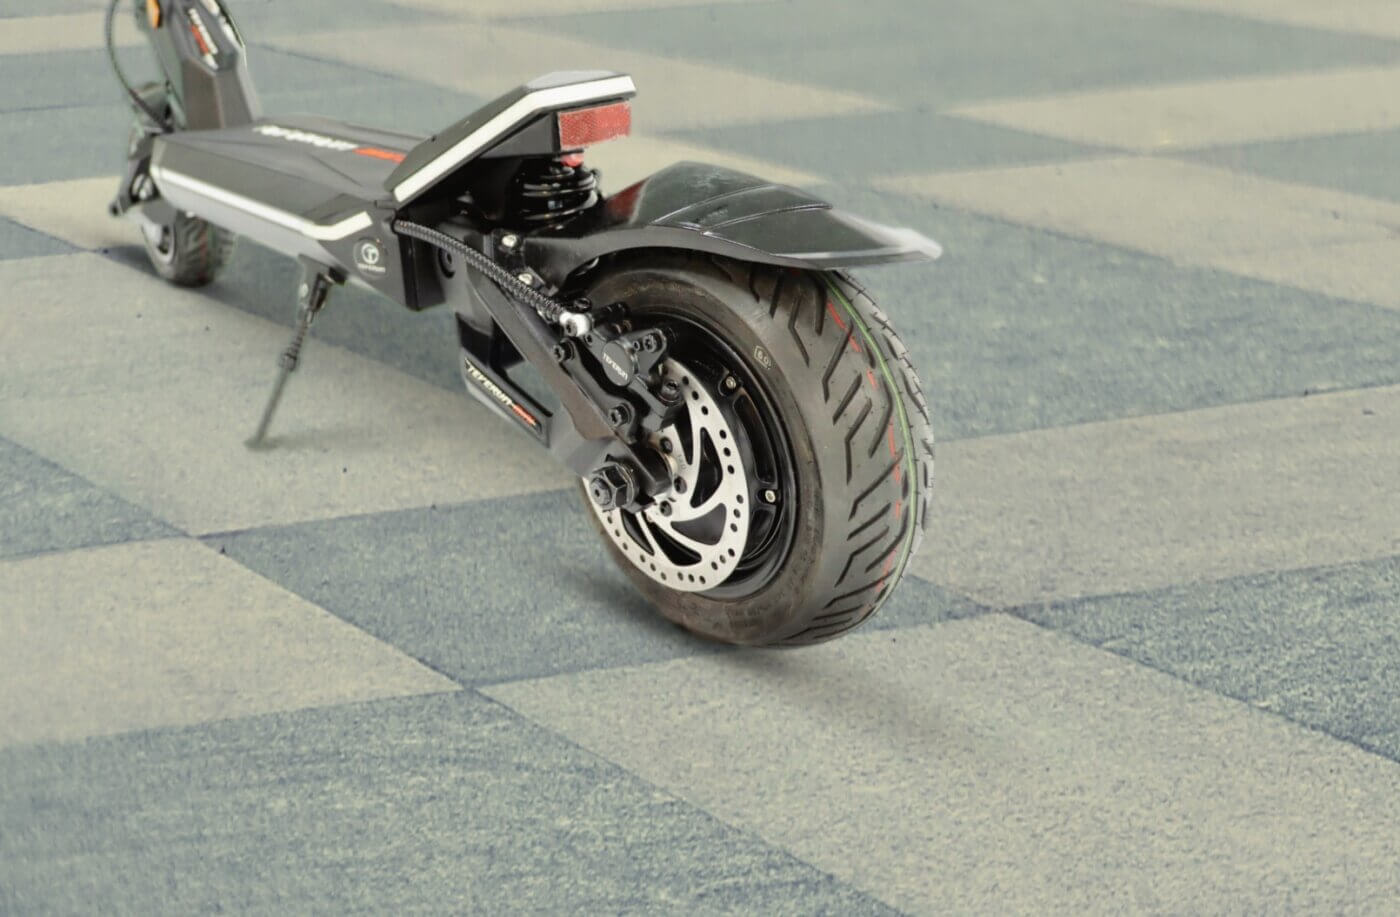 The Fighter Mini electric scooter is parked on a checkered floor.